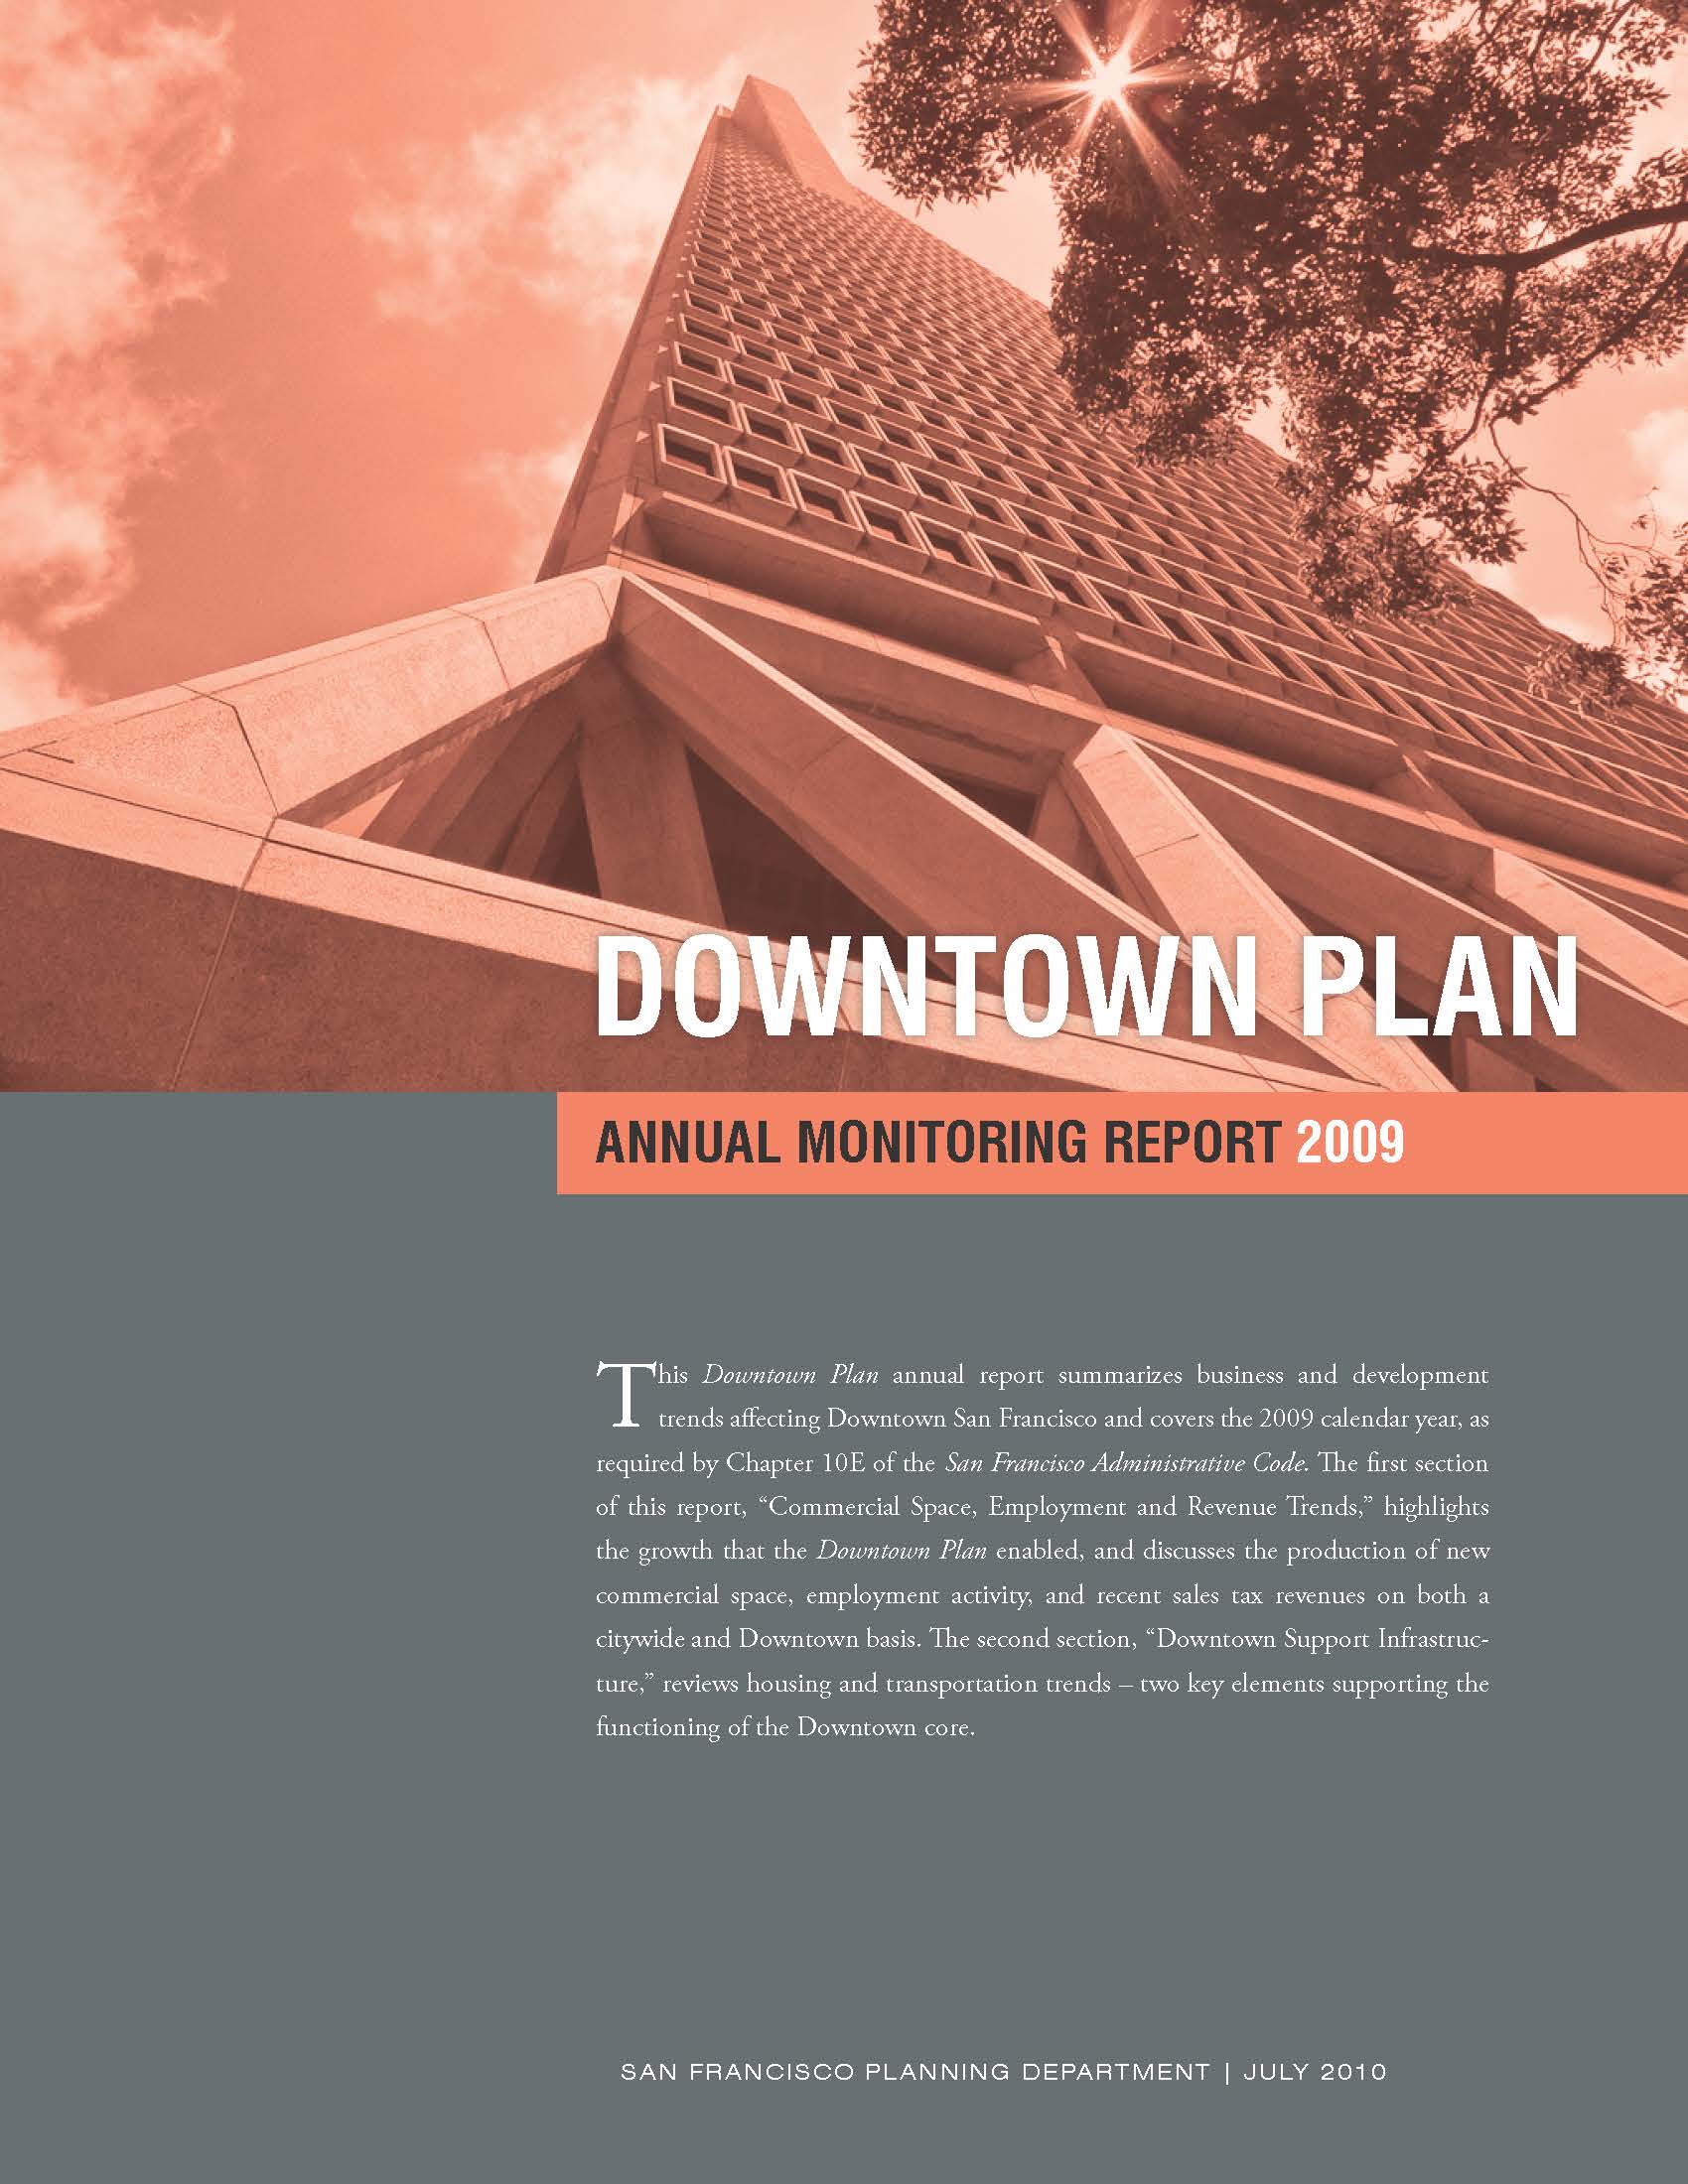 Cover Image for the Downtown Plan Monitoring Report 2009